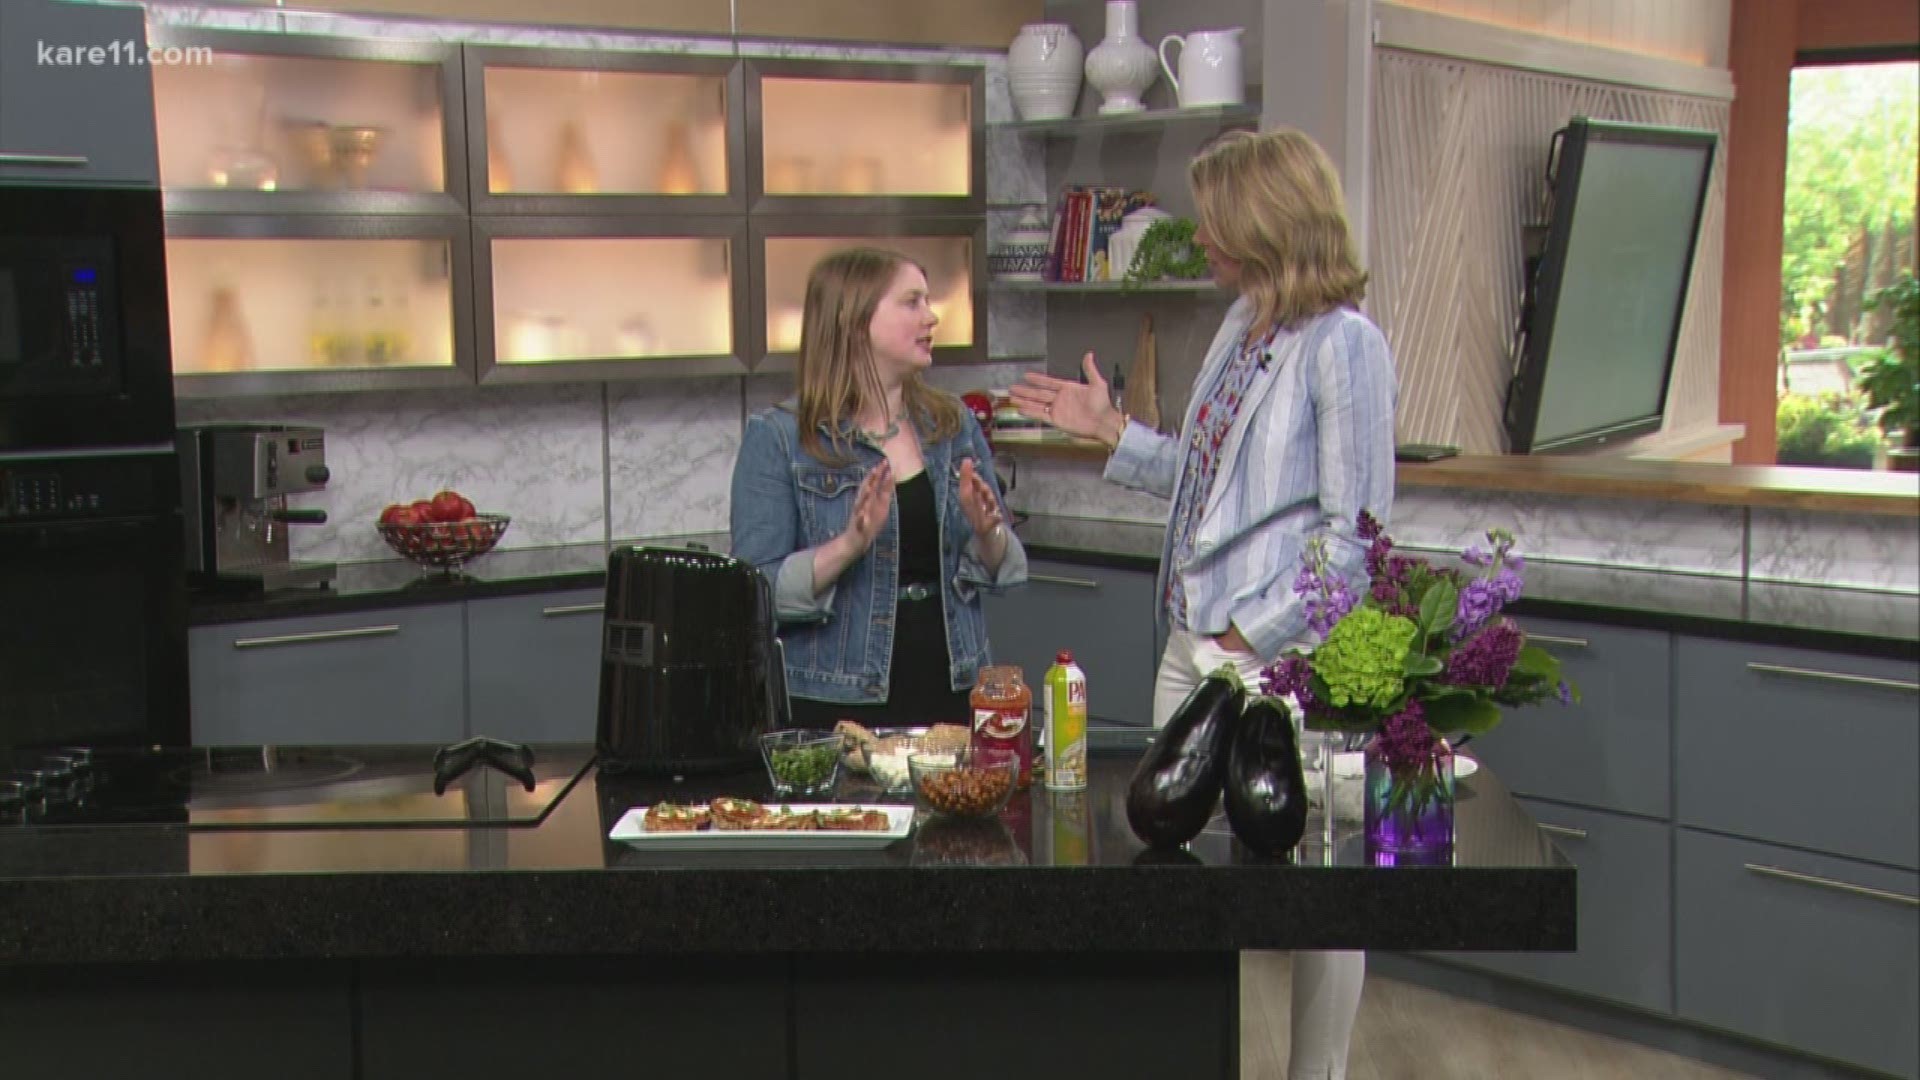 Melissa Jaeger shows us the benefits of using air fryers in her cooking.